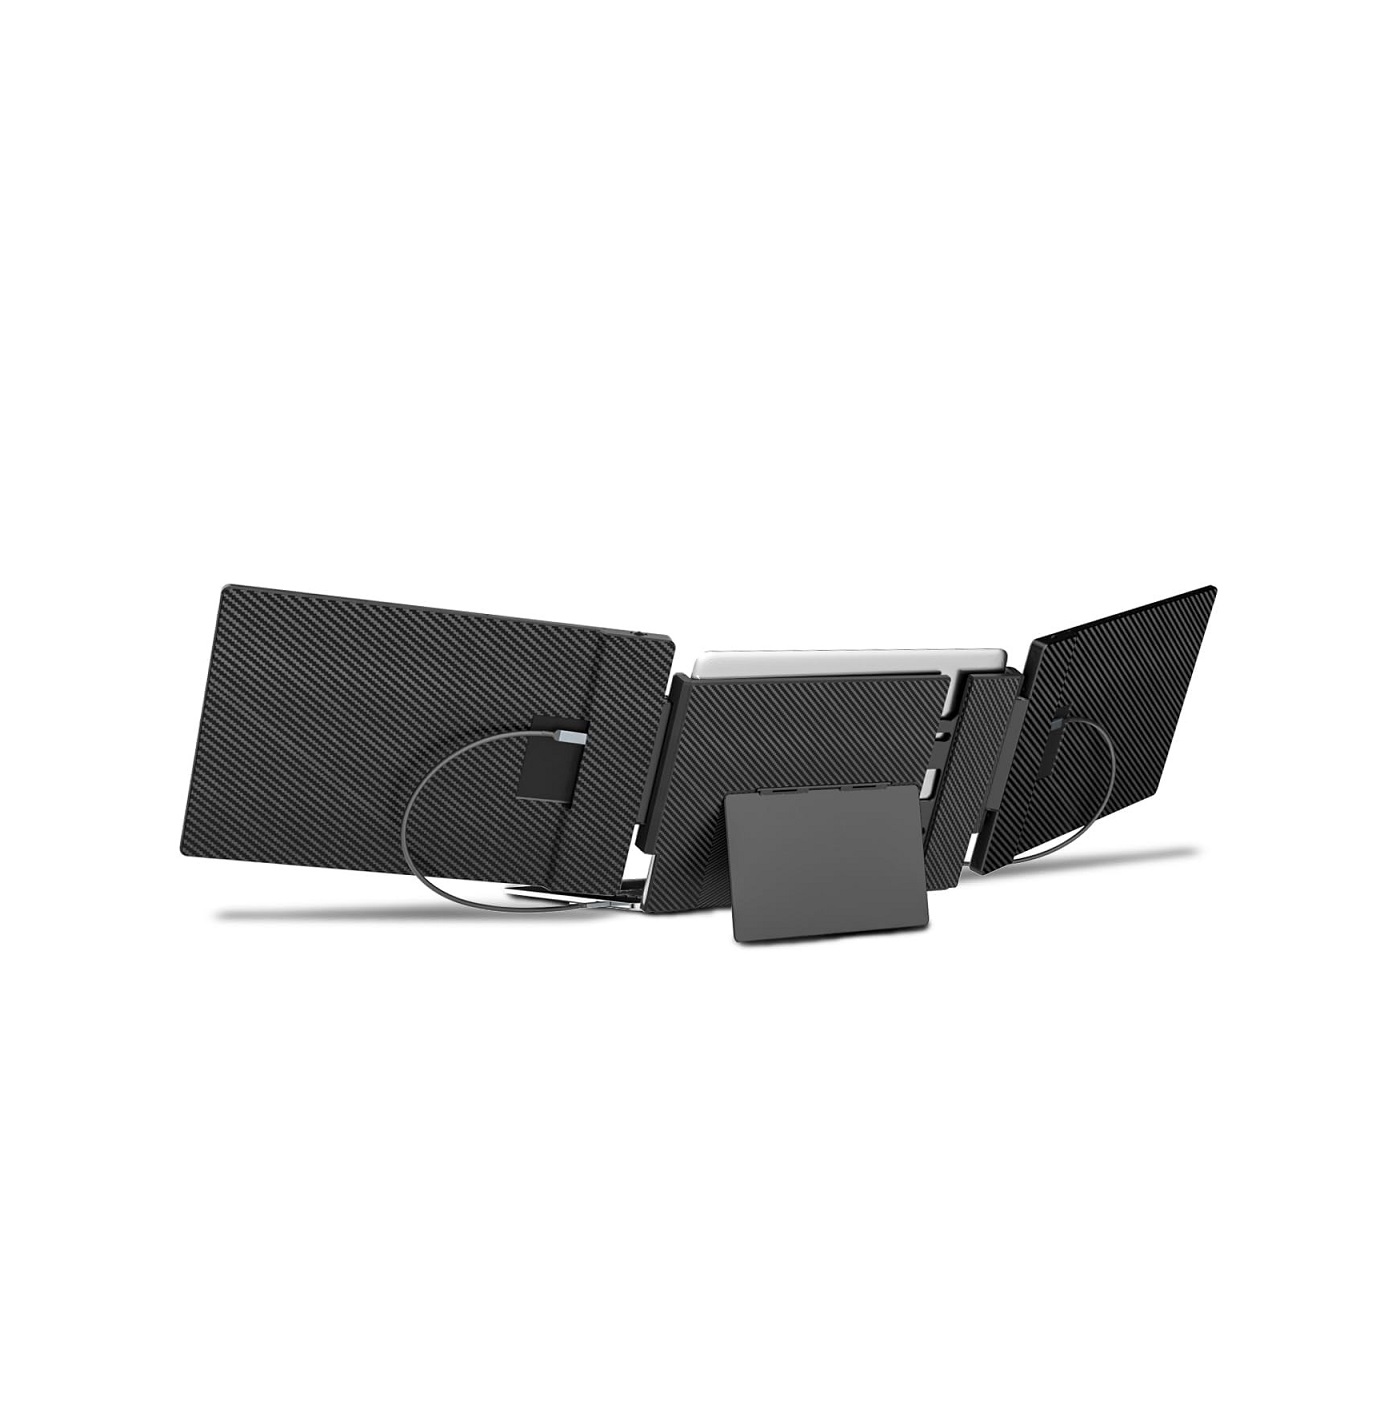 Triple Portable Monitor for Laptop 14'' - S3